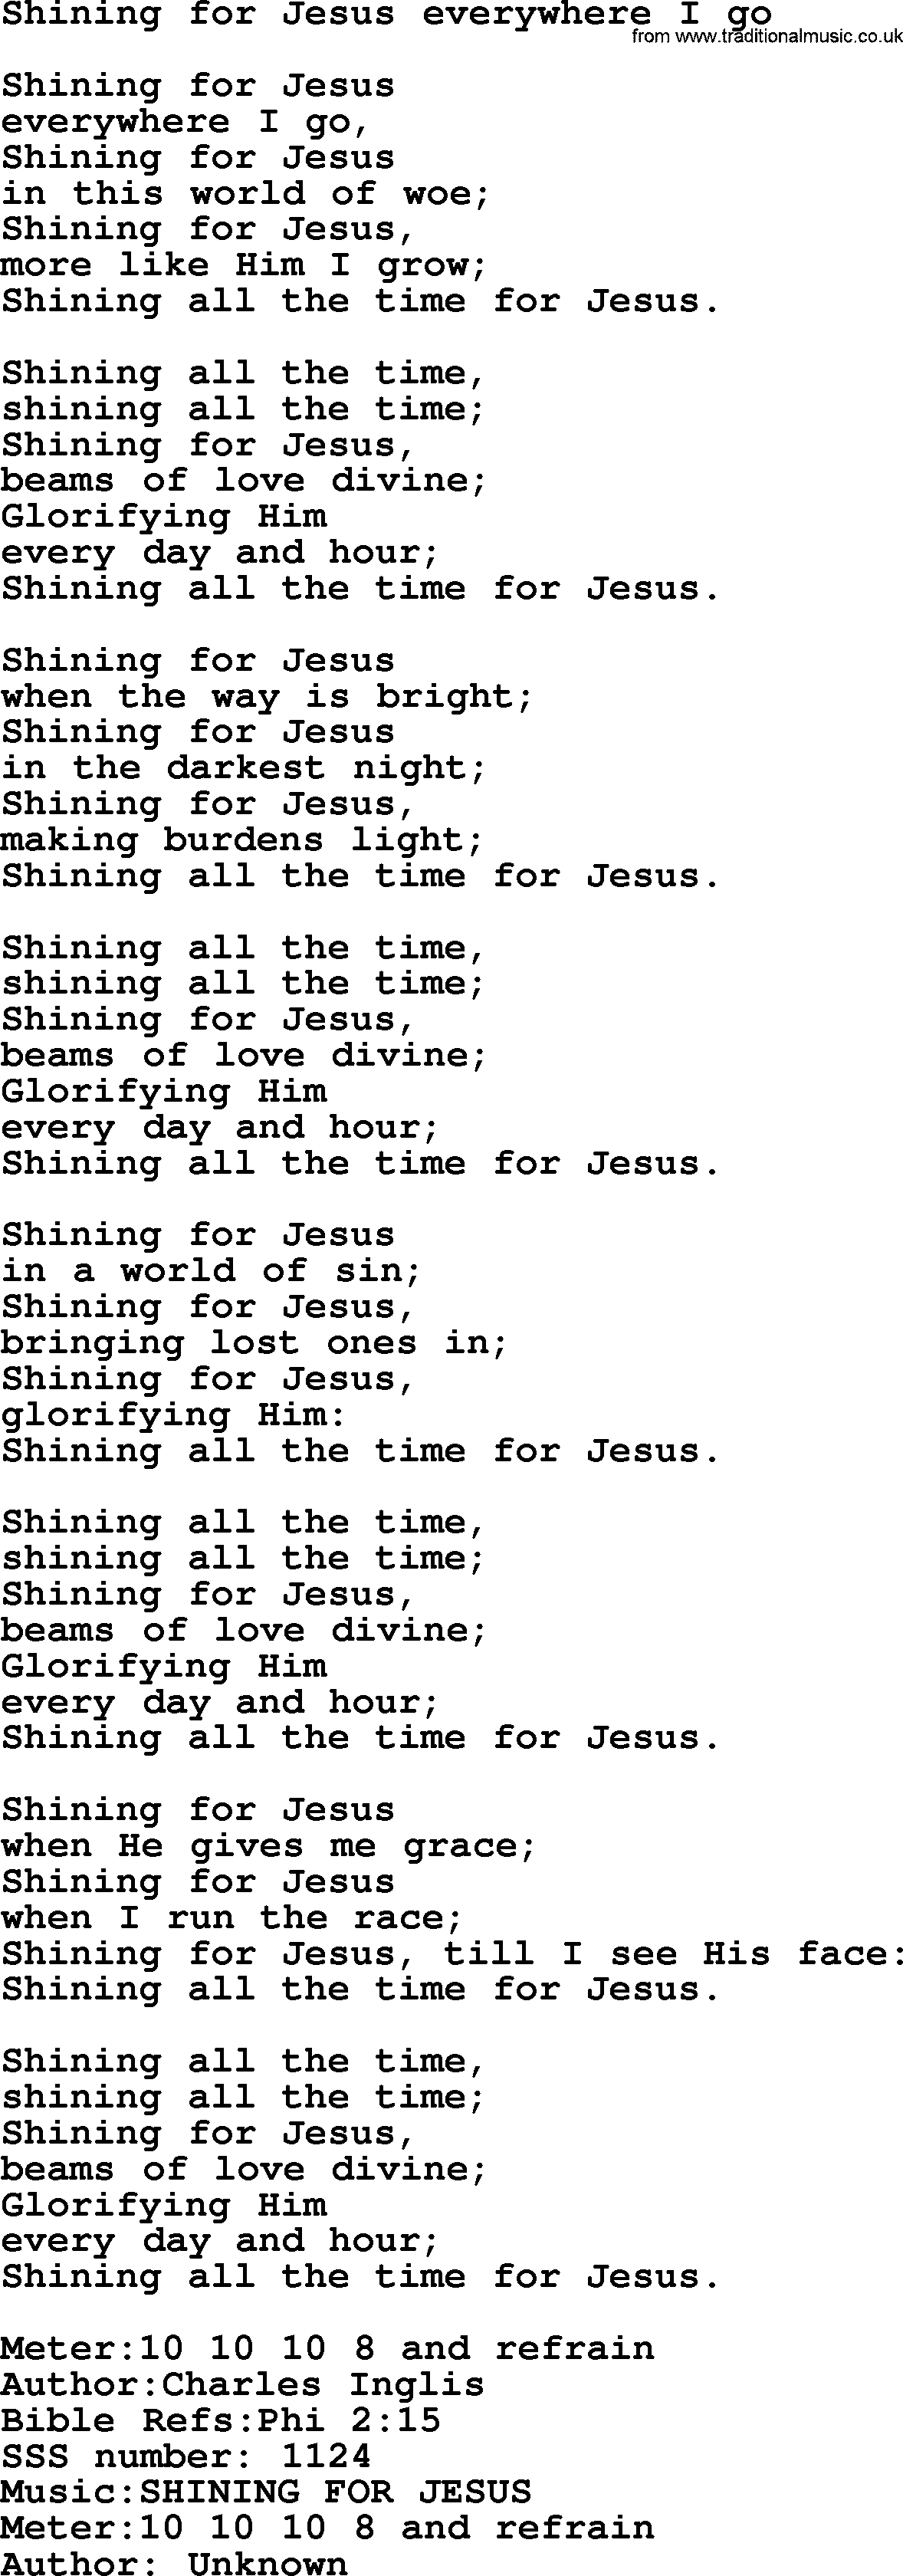 Sacred Songs and Solos complete, 1200 Hymns, title: Shining For Jesus Everywhere I Go, lyrics and PDF